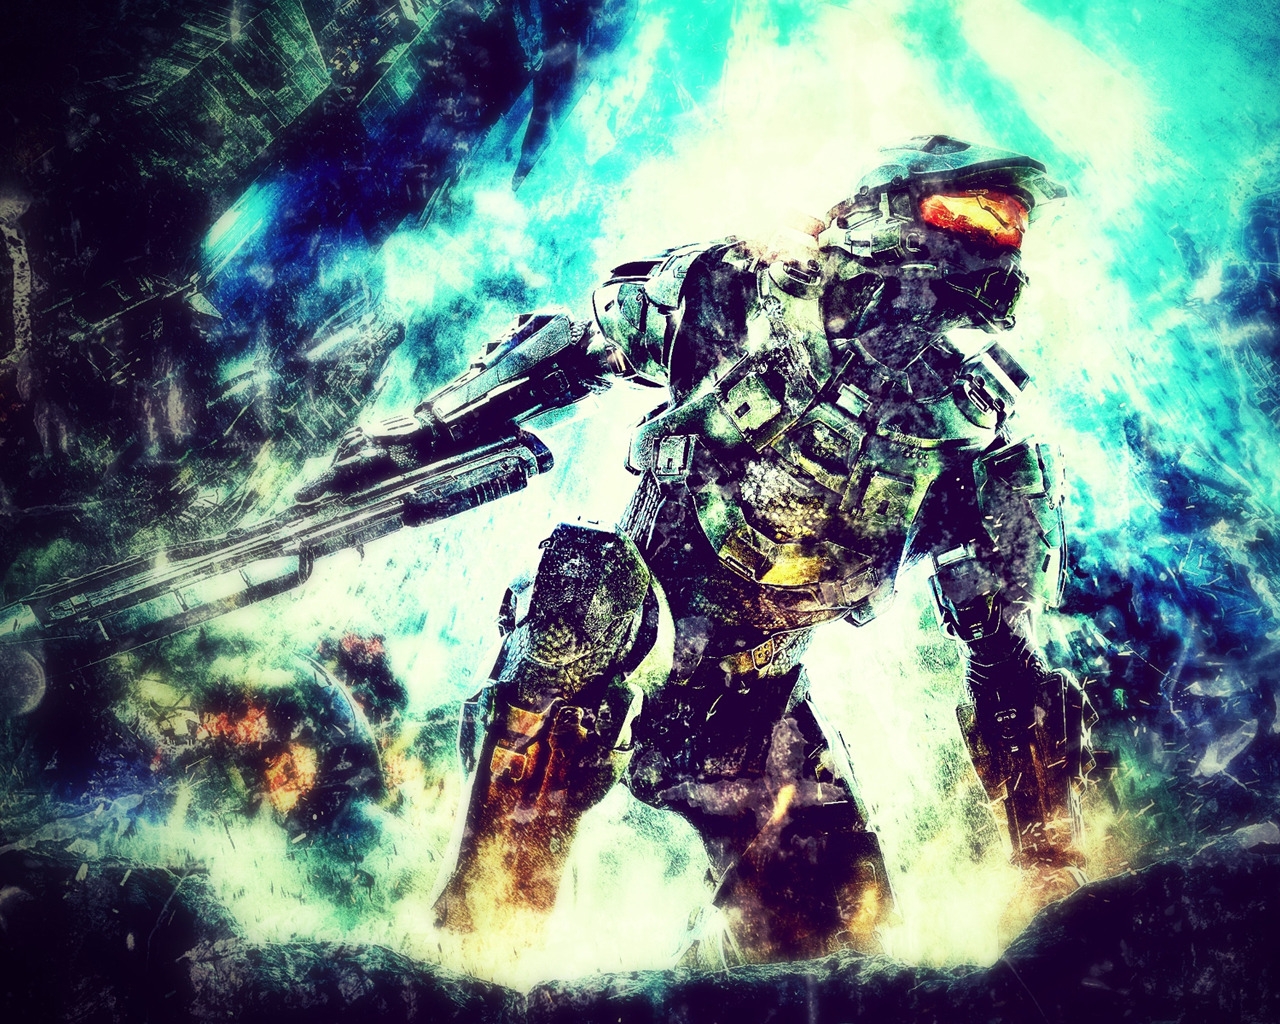 Halo 4 for 1280 x 1024 resolution